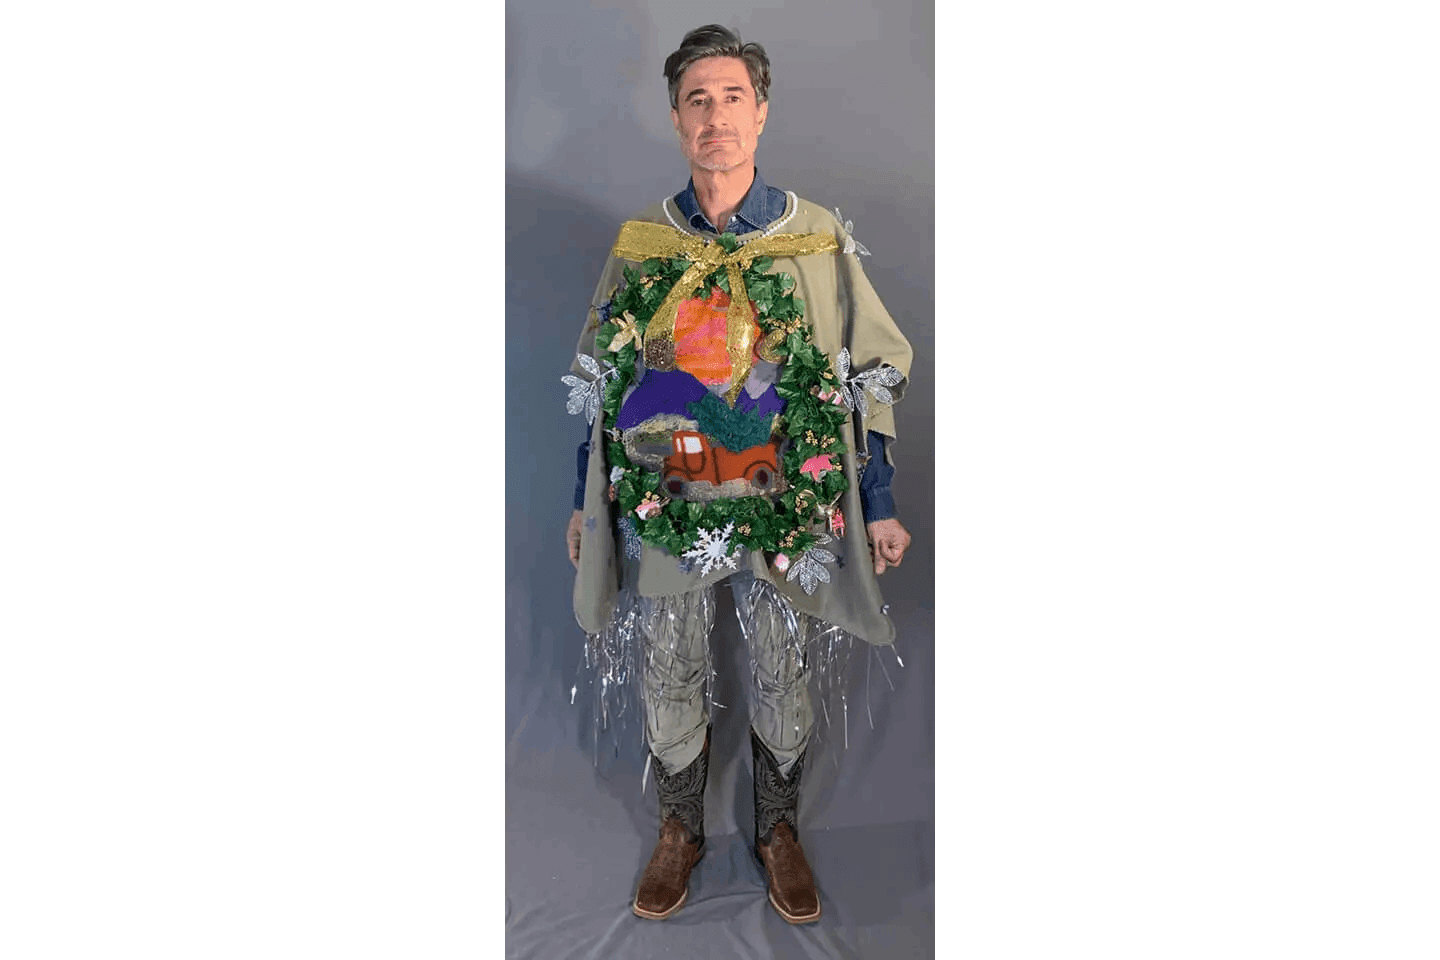 A man in a costume with a wreath on his chest.